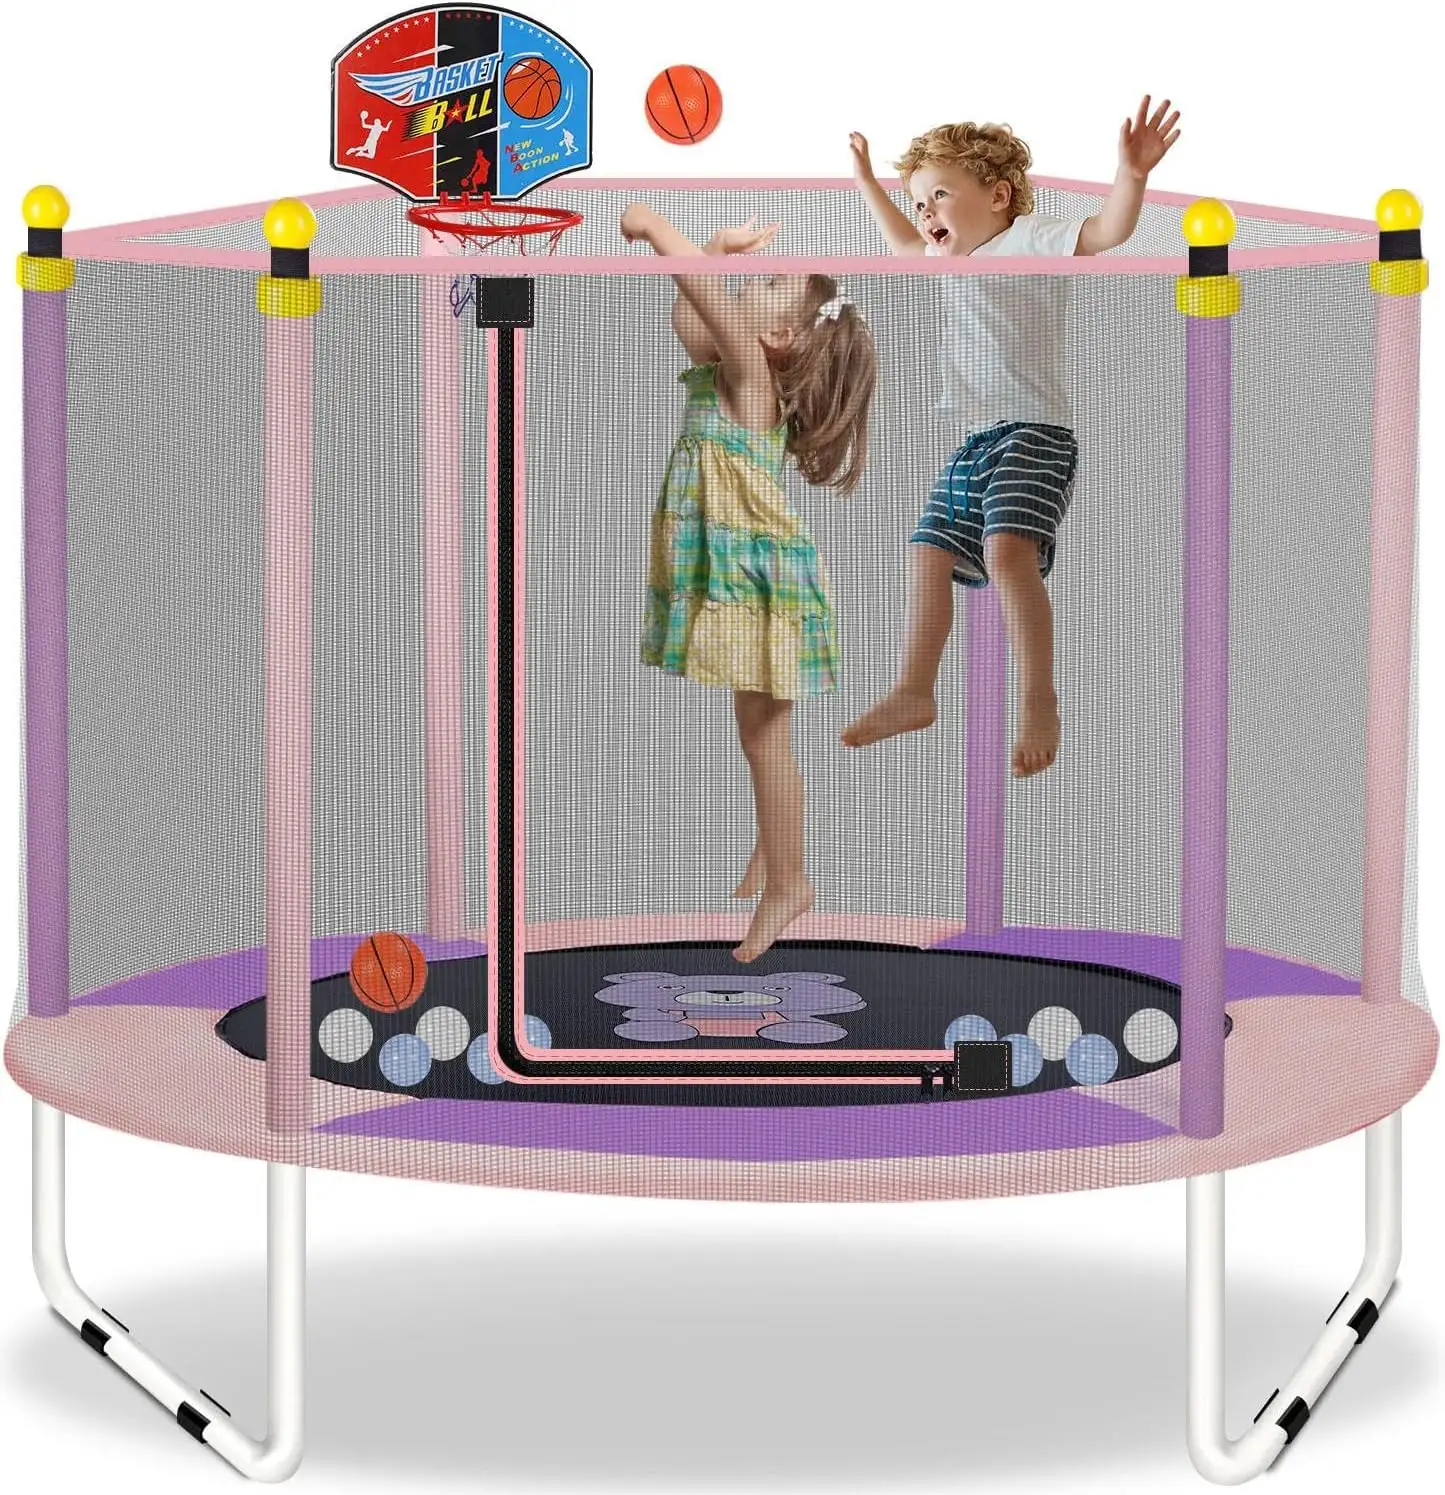 Kids Trampoline with Safety Enclosure Net, Outdoor/Indoor Kids Trampoline with Basketball Hoop